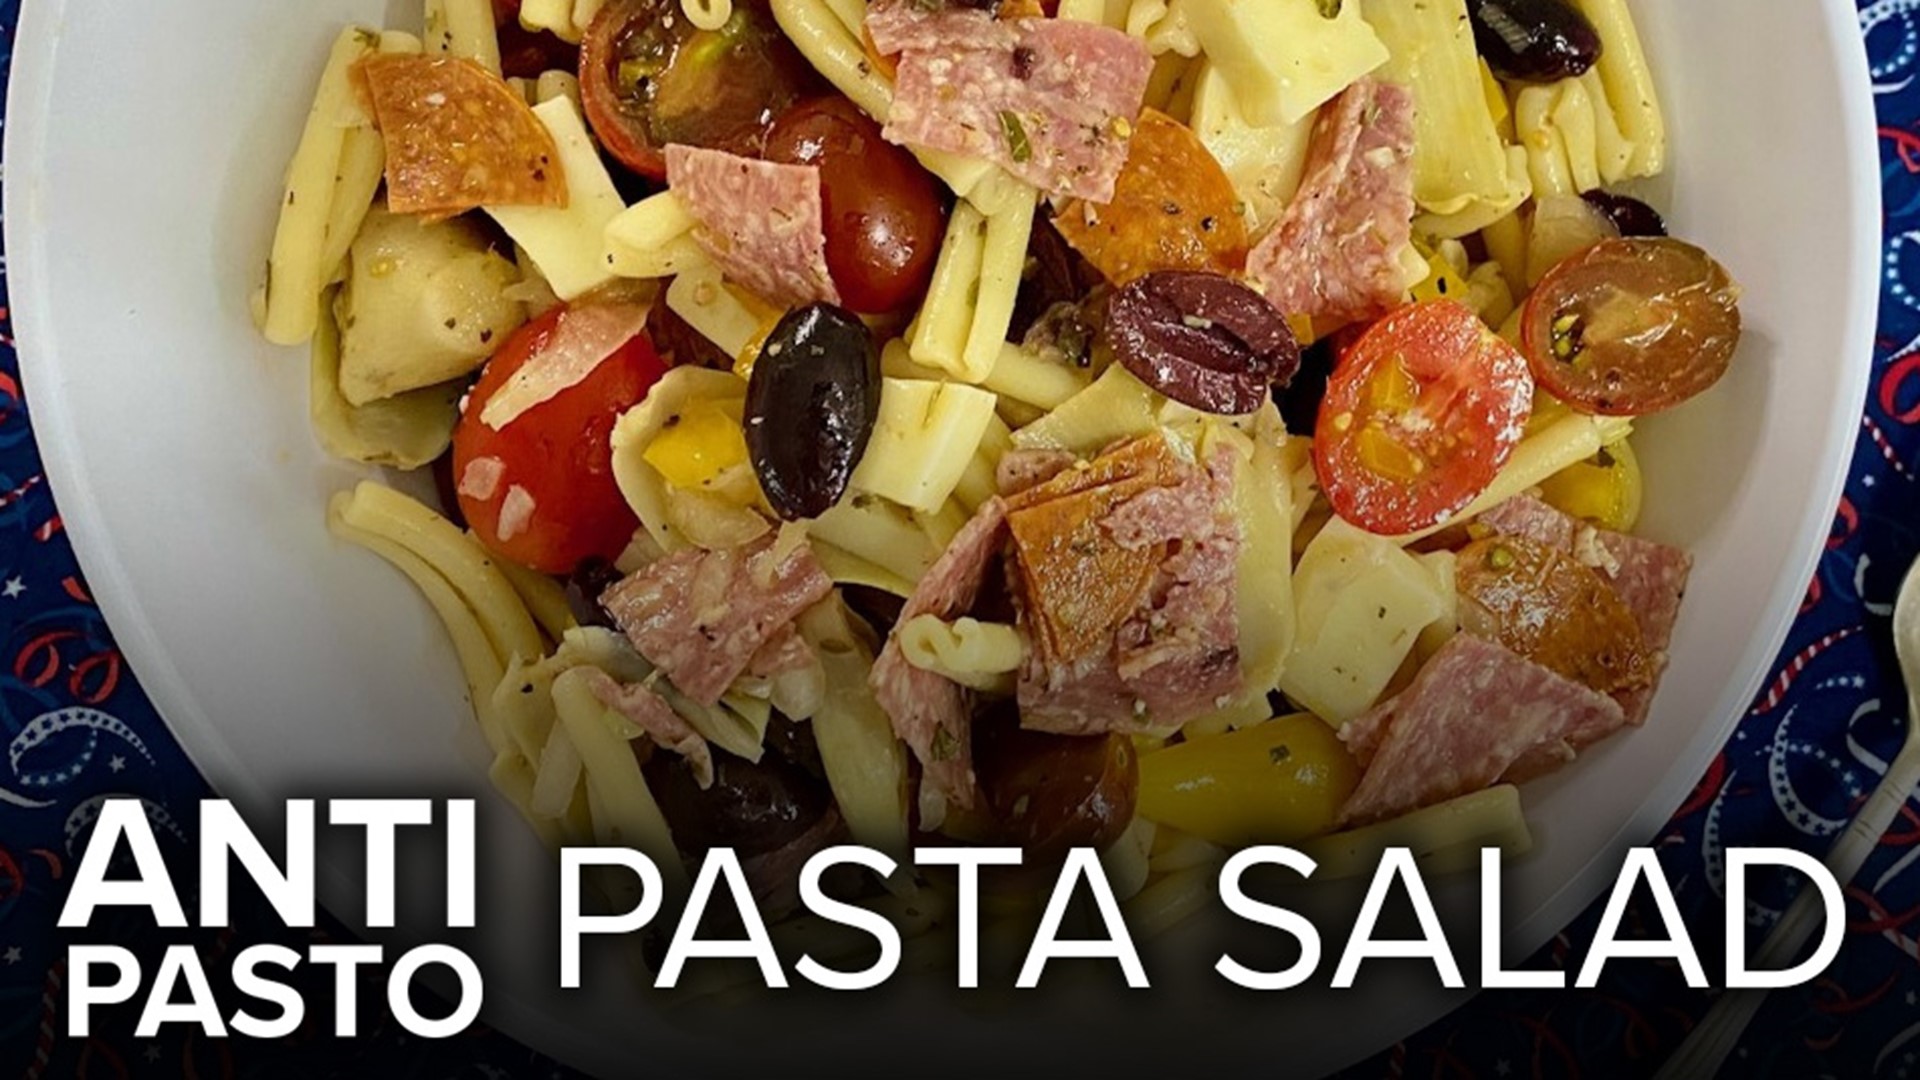 Summer's coming and this Antipasto Pasta Salad is the perfect side to bring along on an outdoor picnic or barbecue!